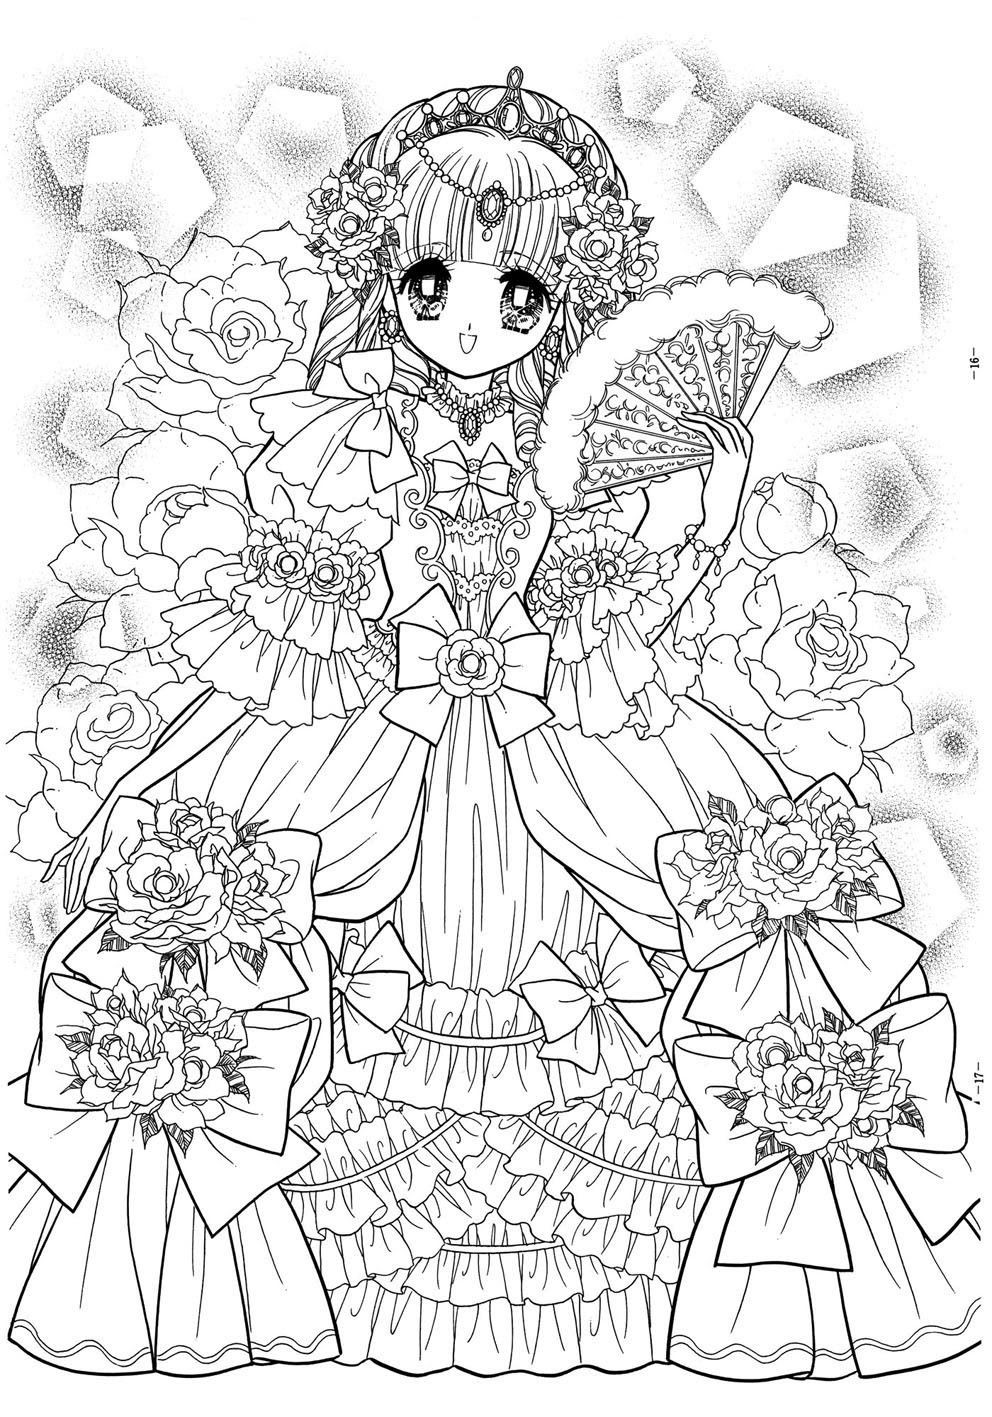 Detailed Coloring Pages For Girls
 Pin by Farideh Saghafi on Coloring Pages